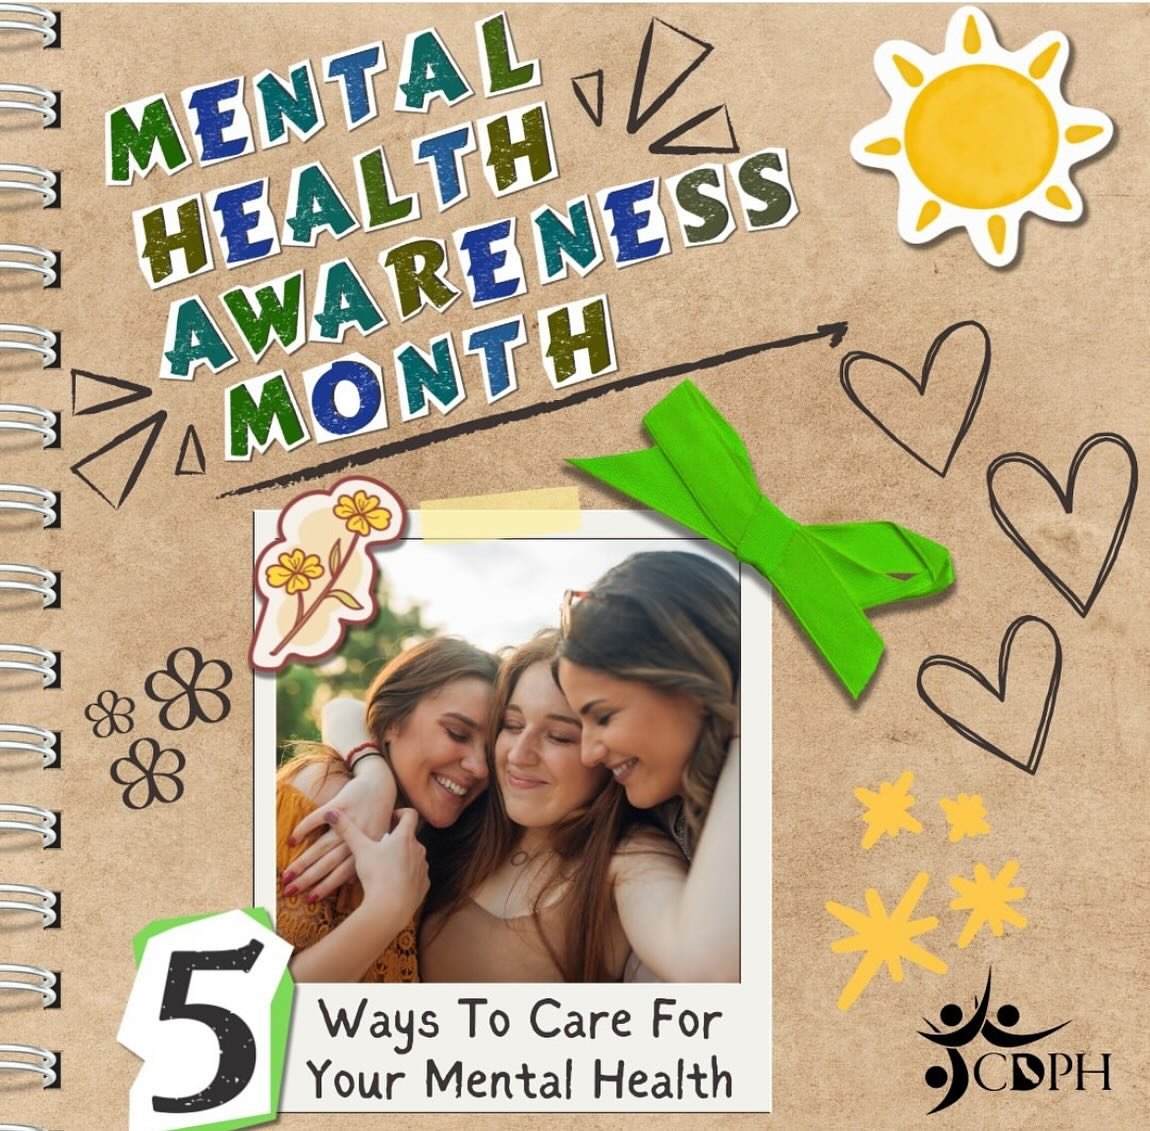 #Repost capublichealth May is Mental Health Awareness Month. Mental health includes emotional, psychological, and social well-being which are all essential to your quality of life and overall health.

We can train ourselves to be intentional about ca